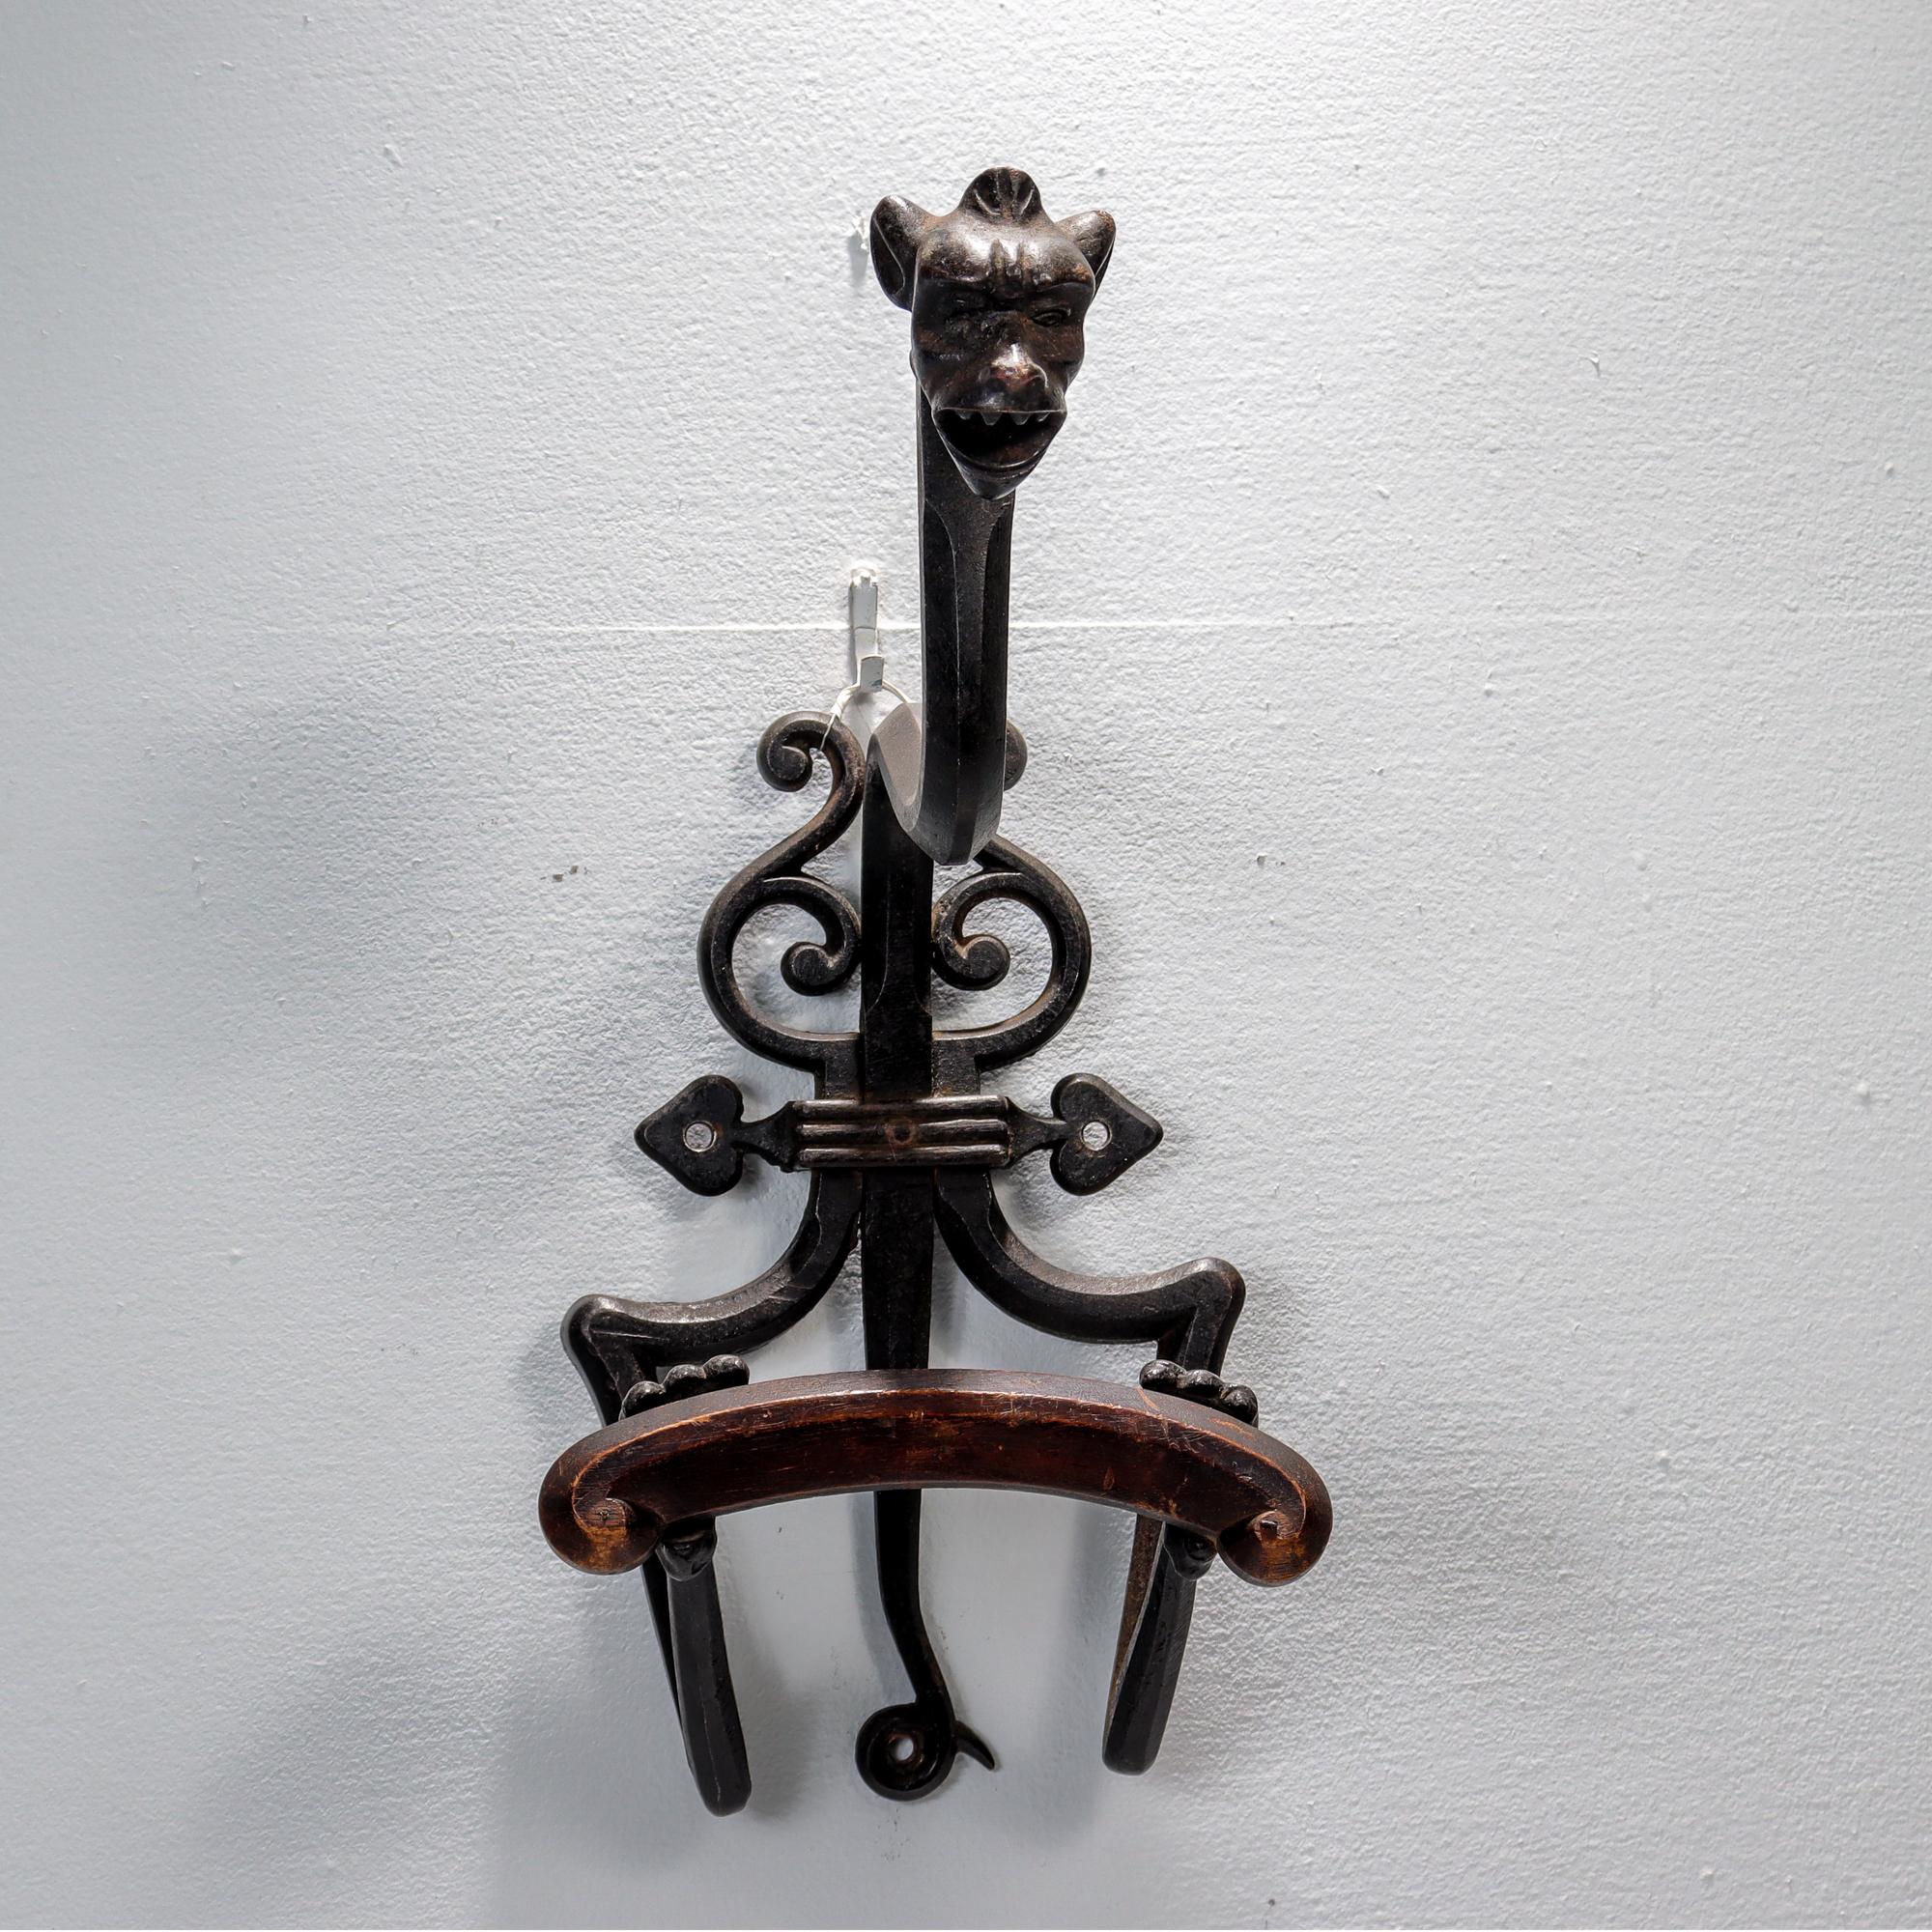 A fine antique Gothic Revival coat rack.

In the form of a two-legged gargoyle with an elongated neck holding a wooden support and mounted to the wall with a shaped bracket. 

In handmade wrought iron with a carved wooden support across the